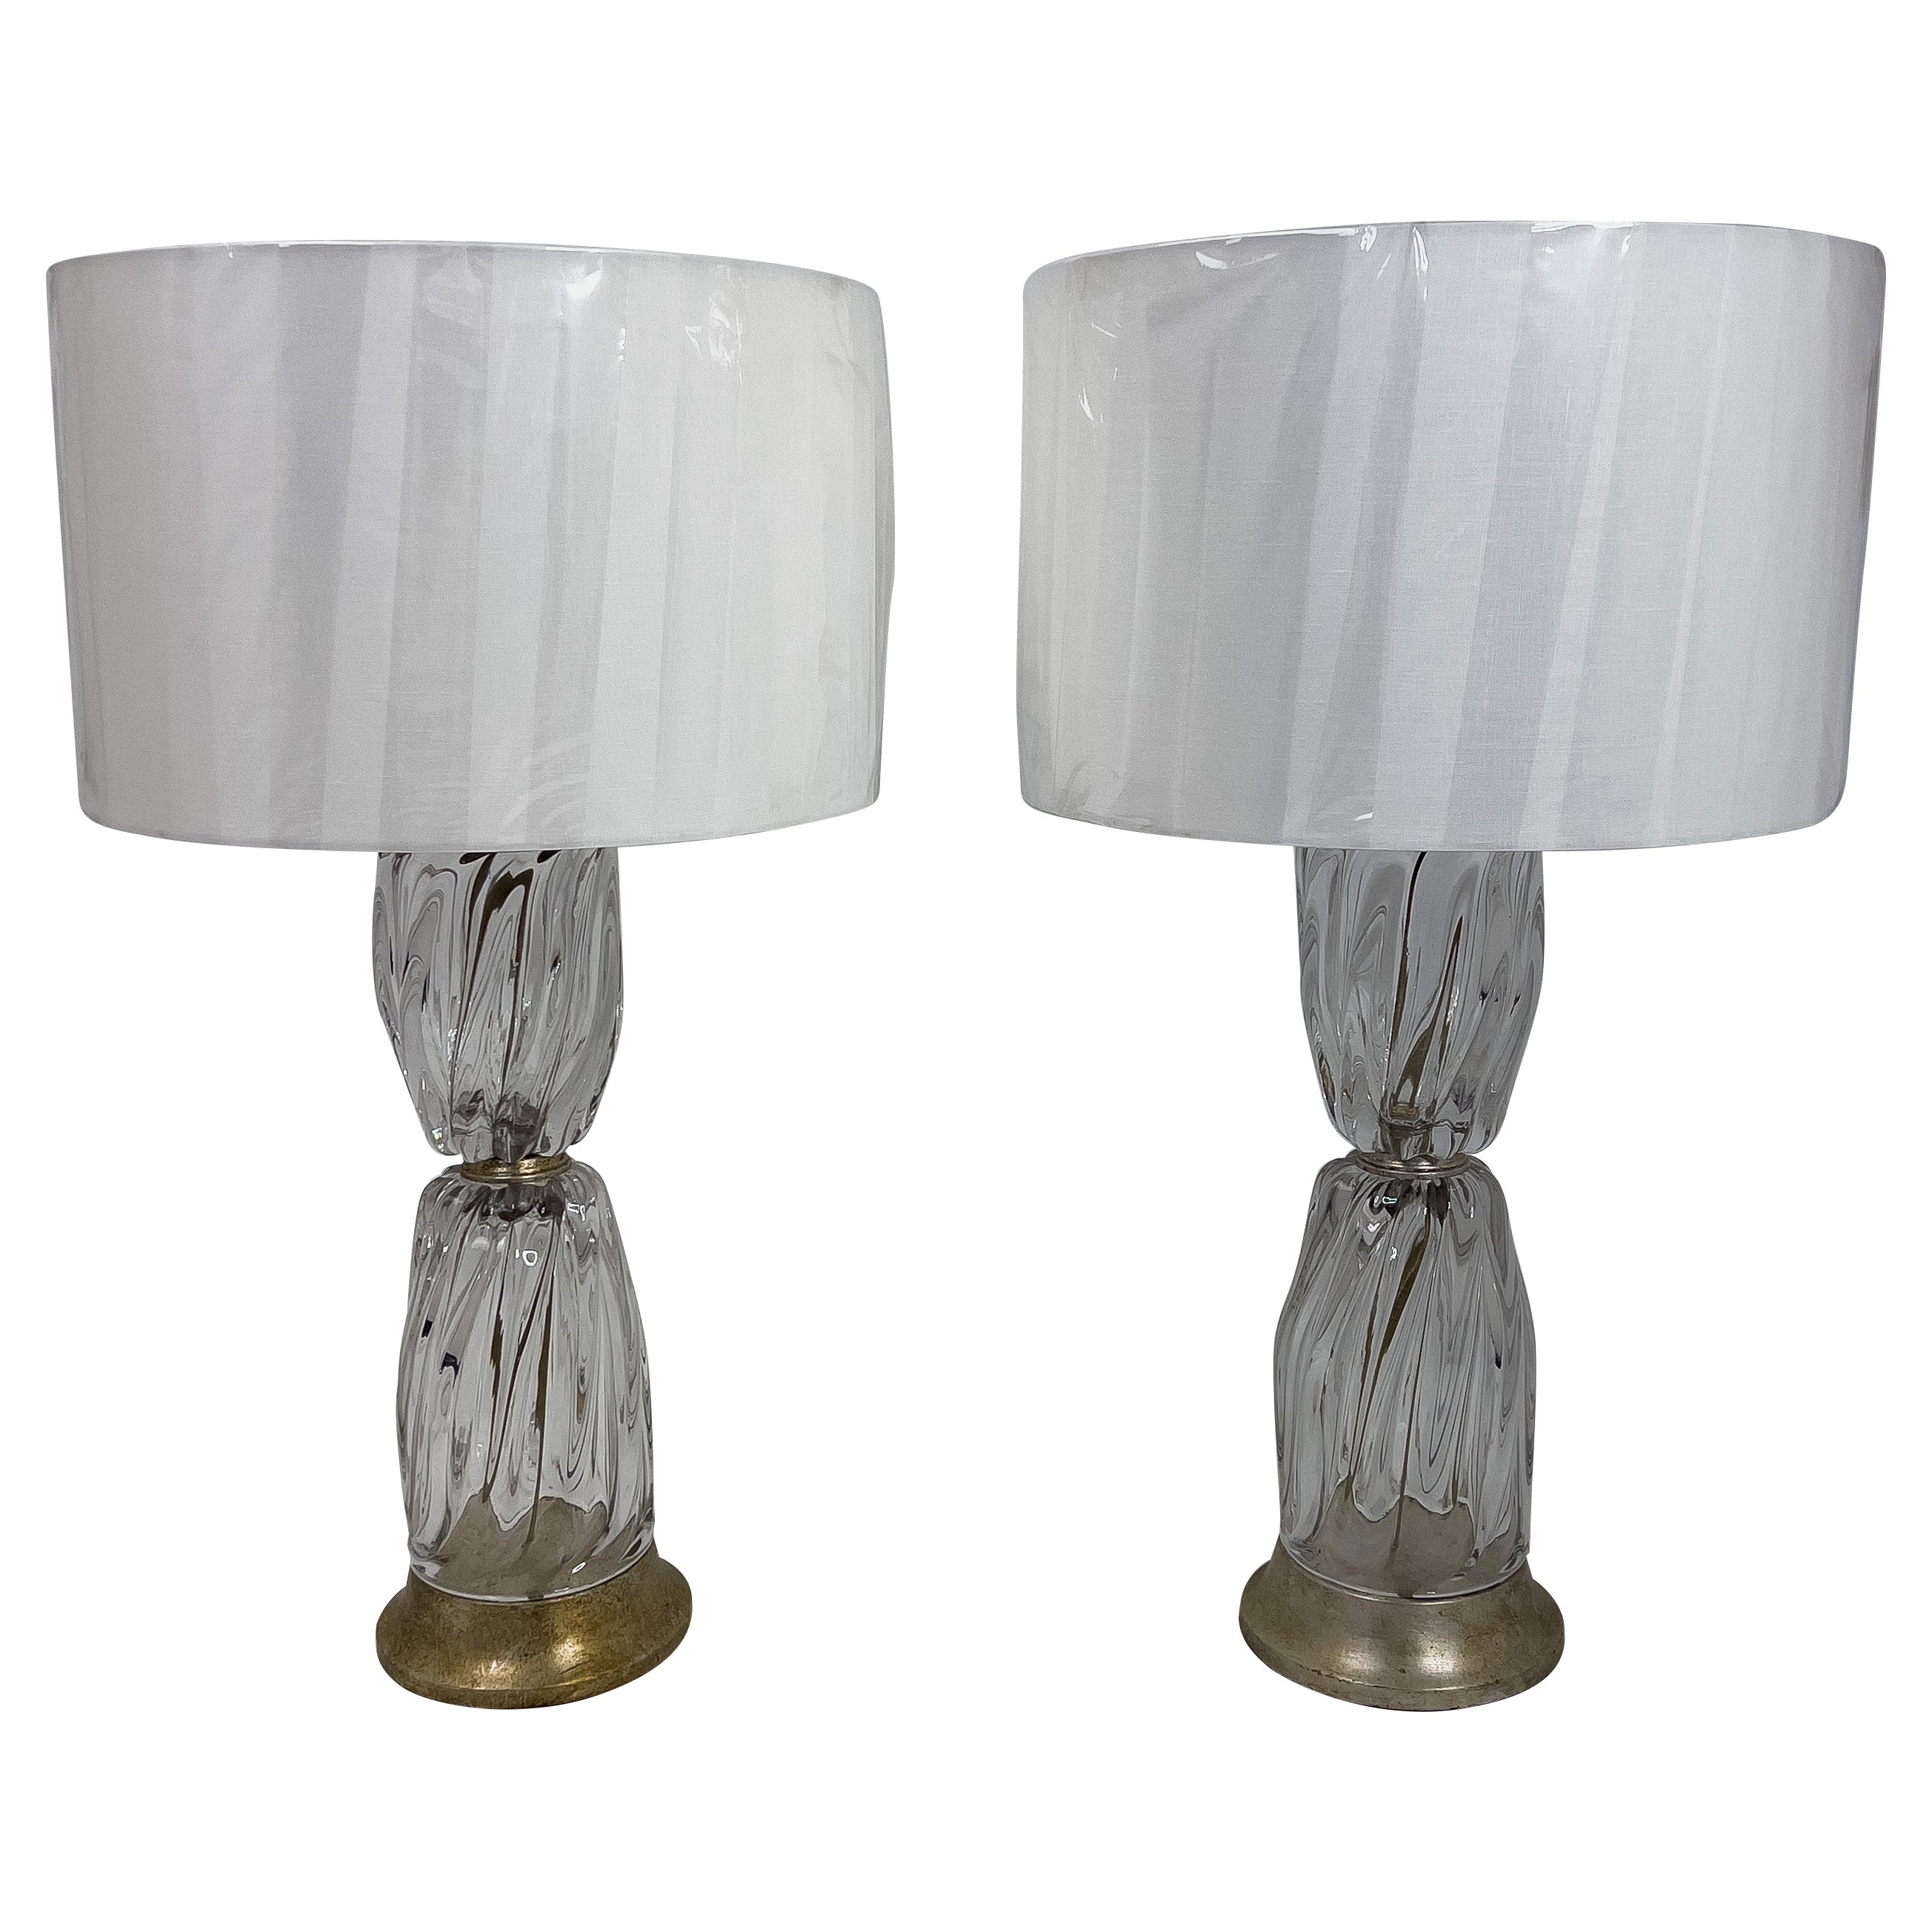 Monumental Pair of Italian Murano Clear Glass Lamps. The glass has a twisted pattern and the metal base and cap have a modeled silver leaf finish. These lamps are topped with round linen shades.